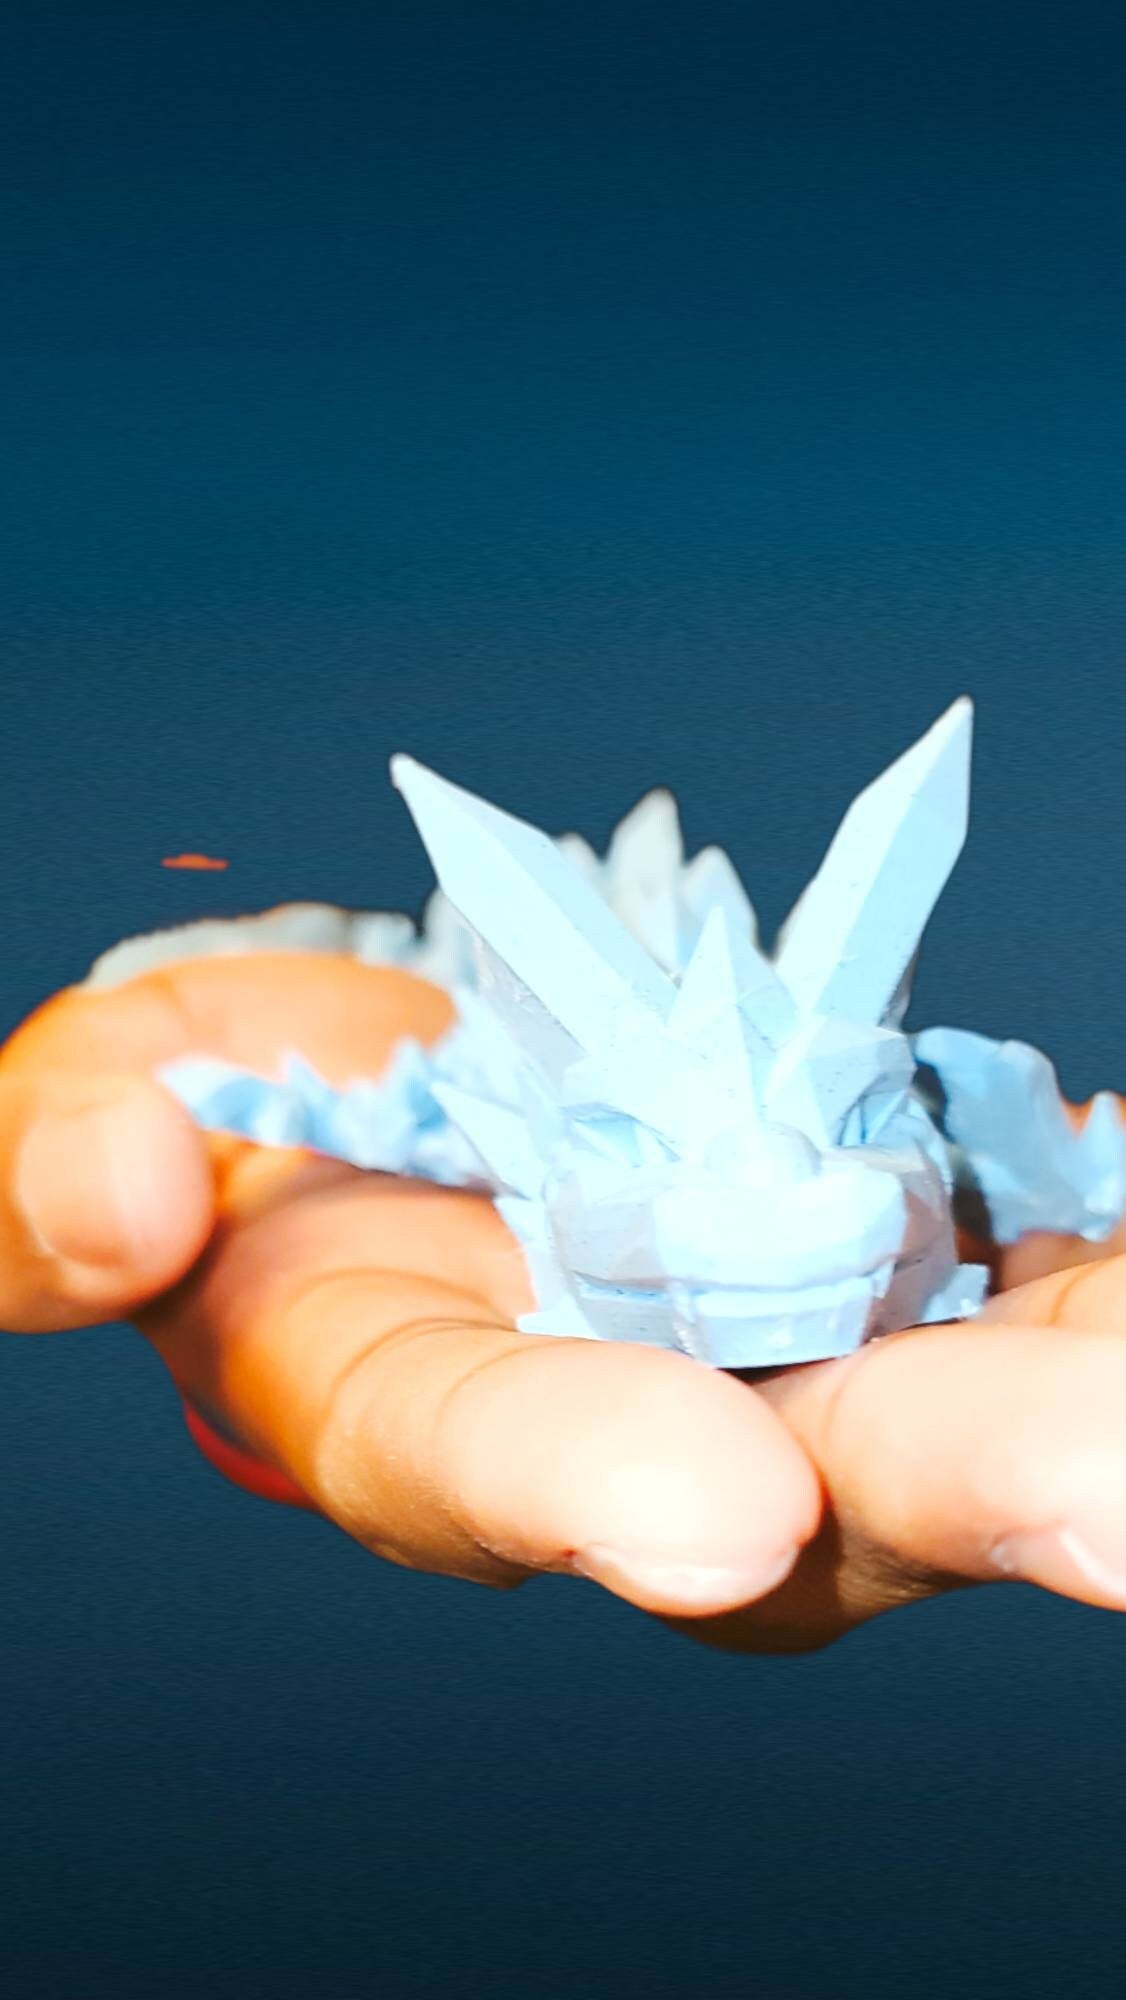 Articulated Ice Crystal Flexible Dragon 3D